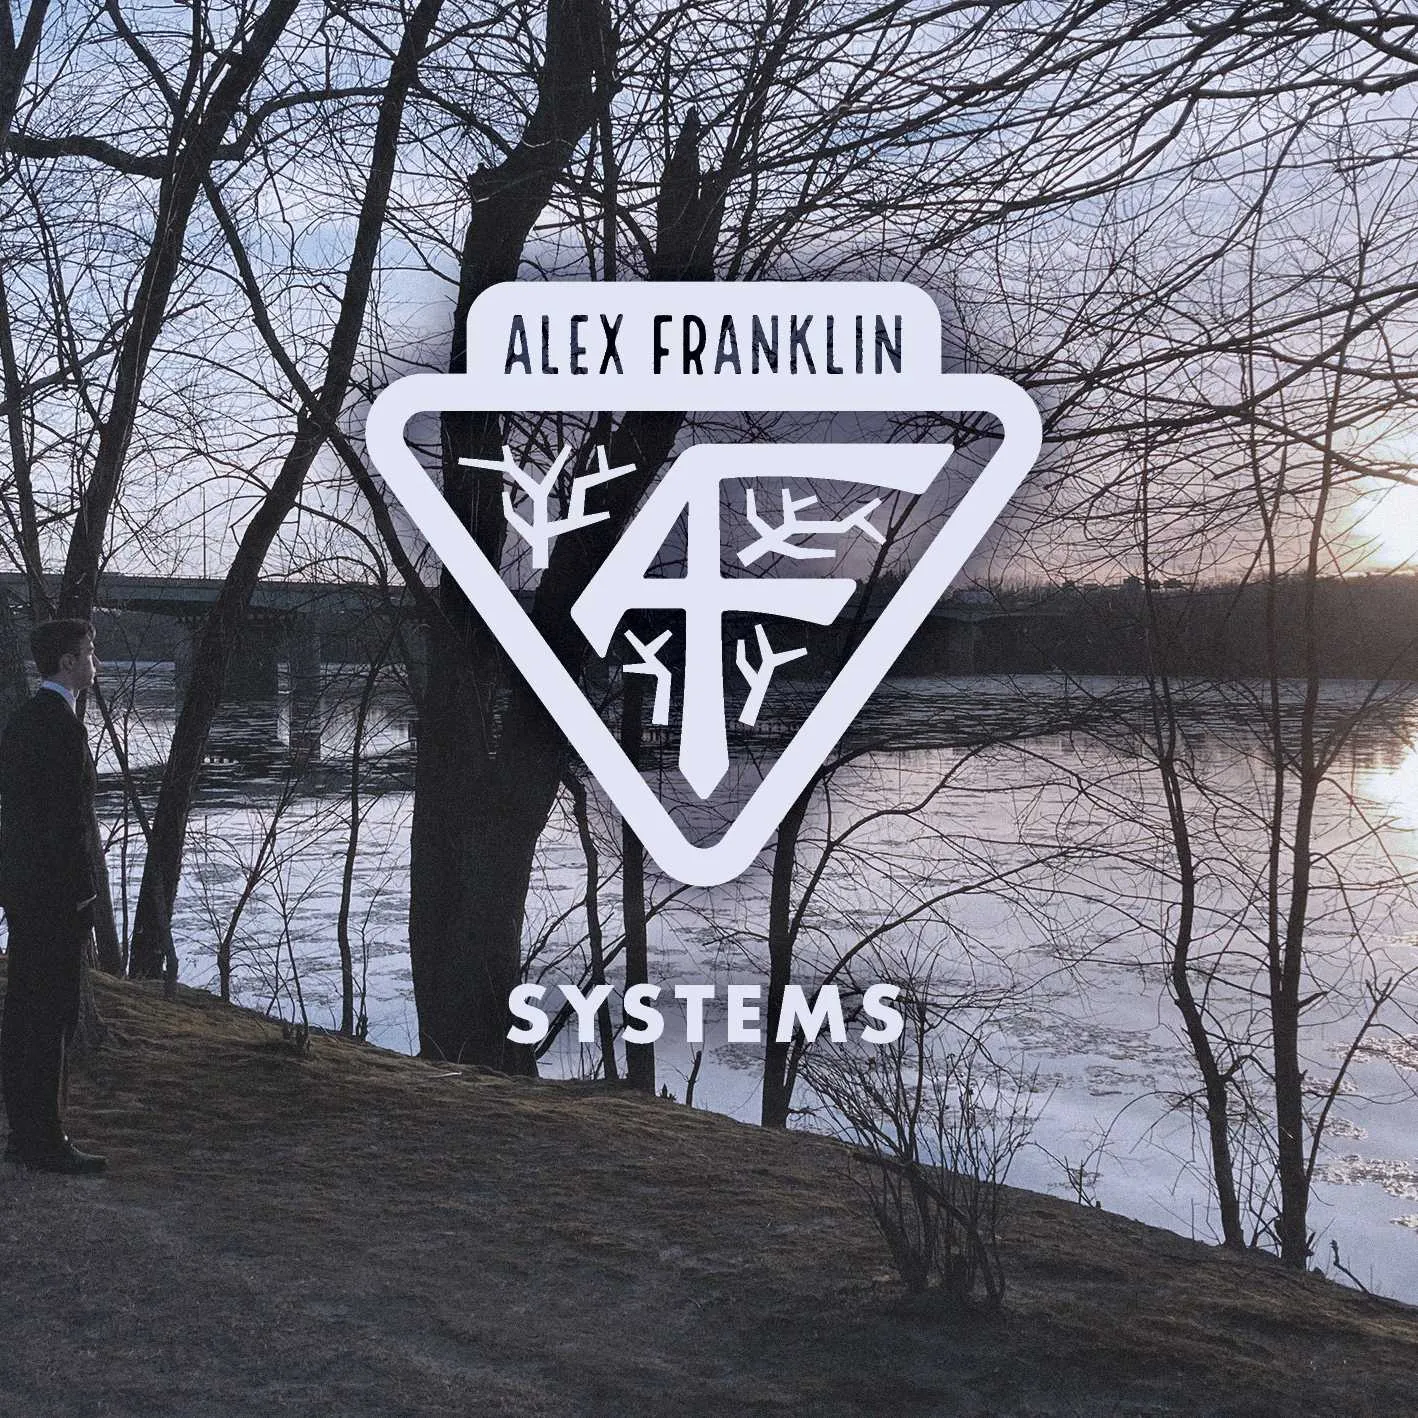 Album cover for “Systems” by Alex Franklin